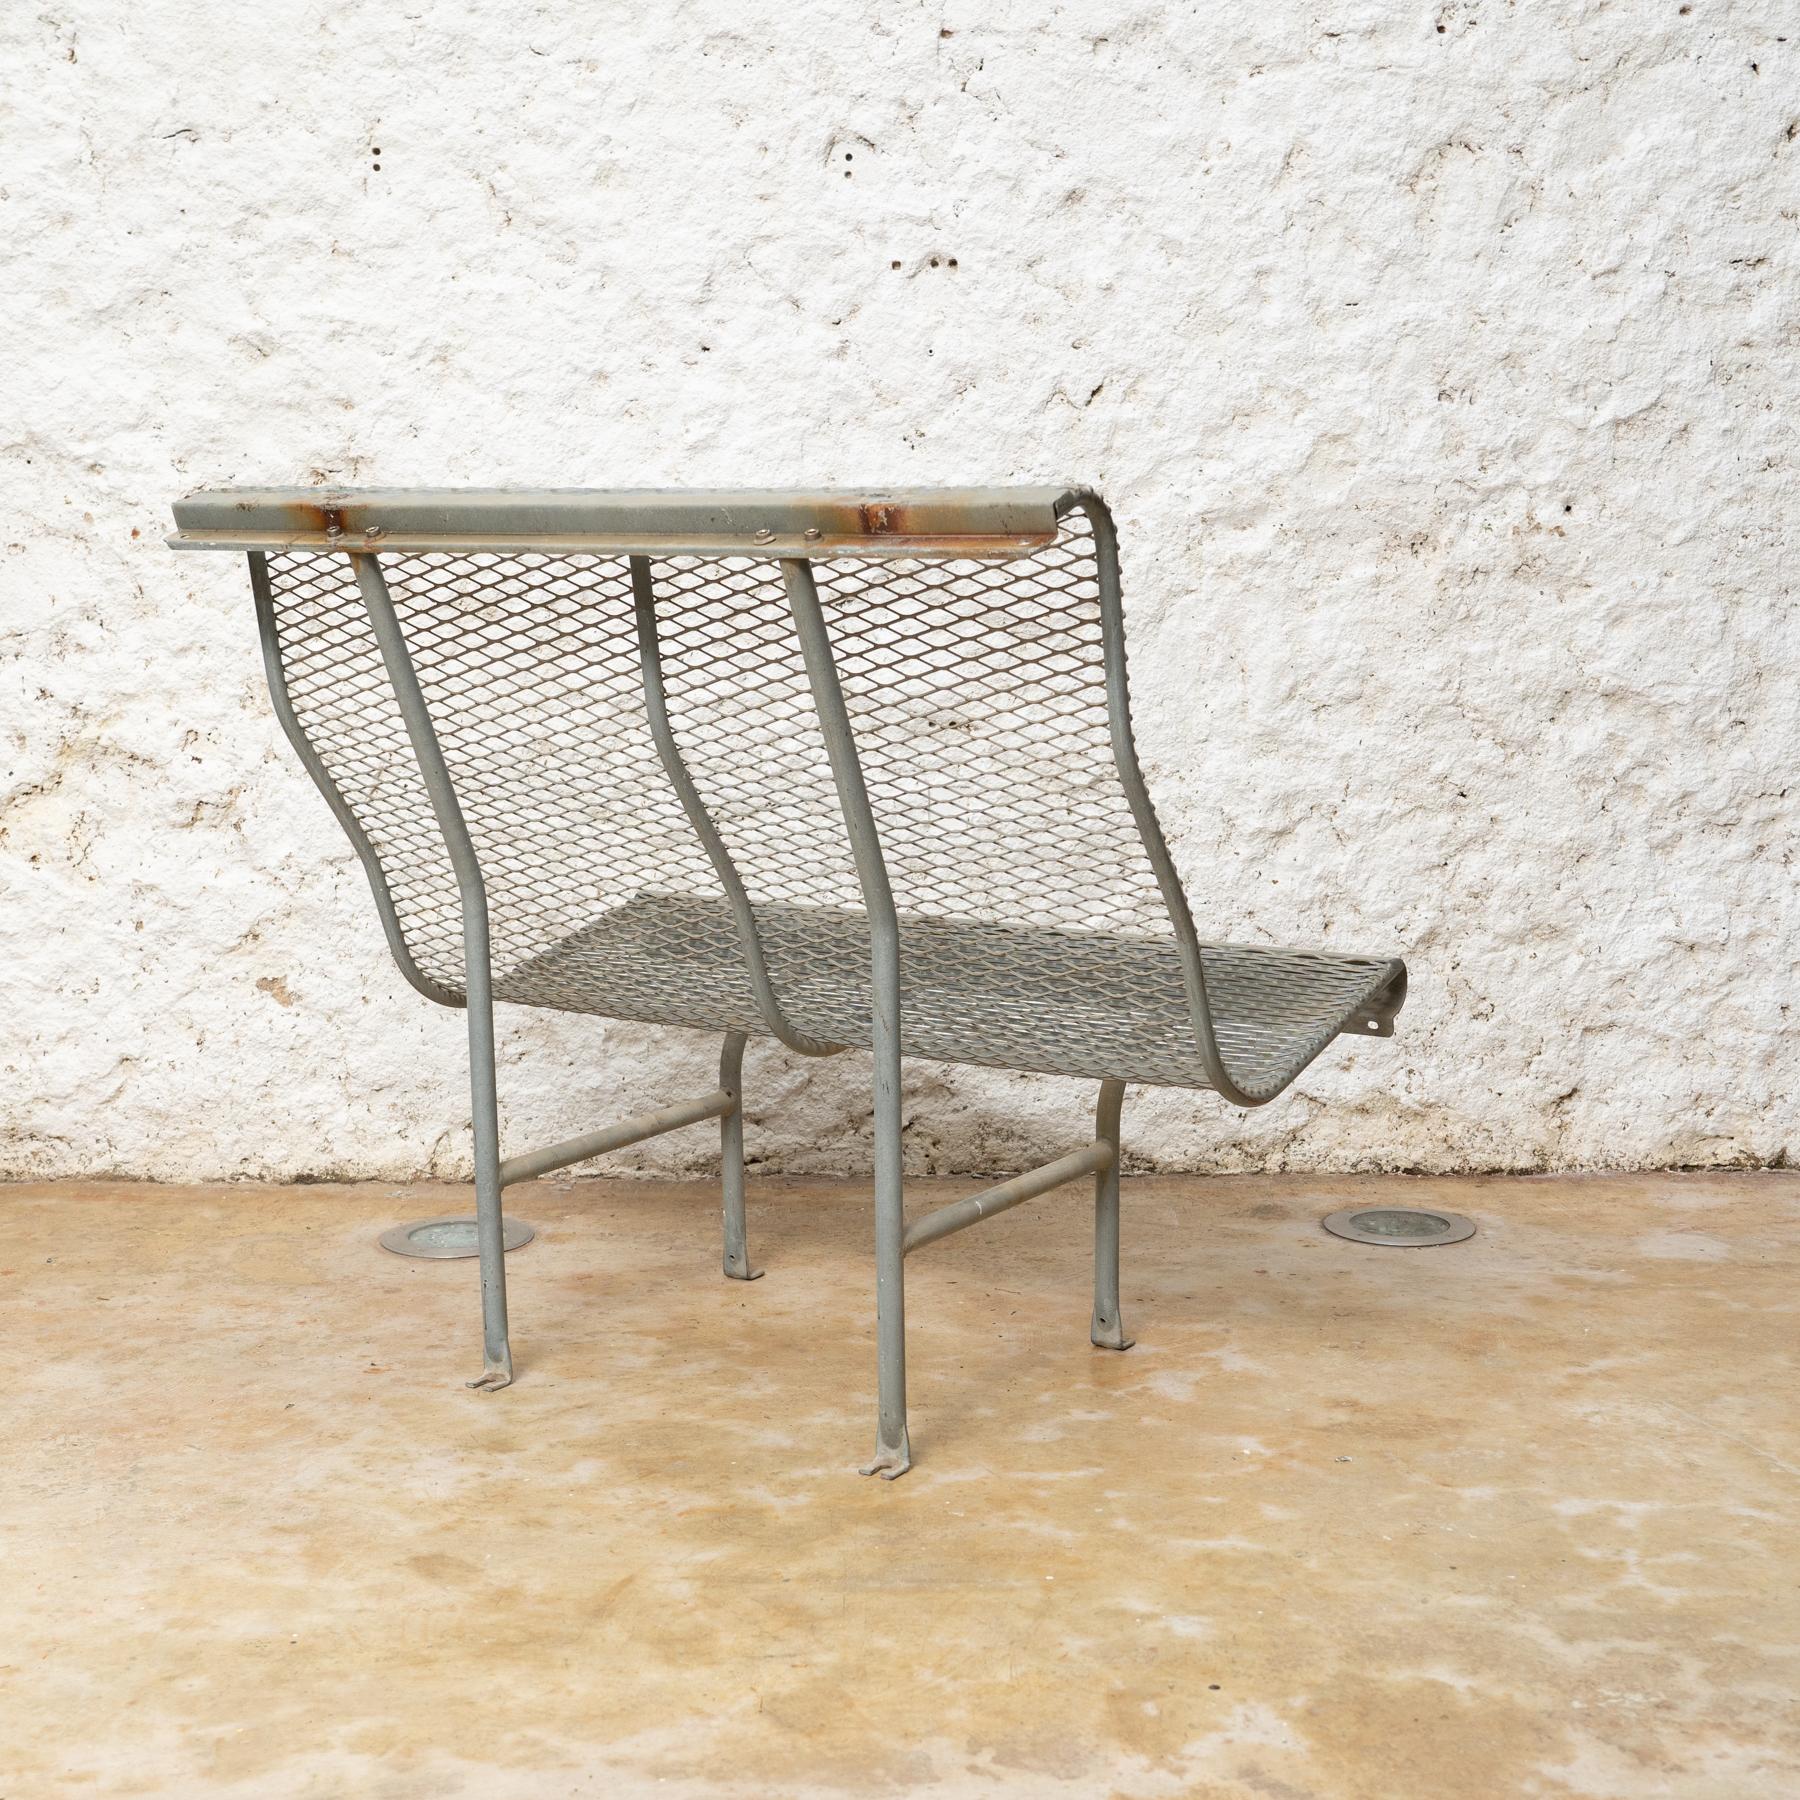 Late 20th Century Metal Bench Version “Perforano” by Oscar Tusquets for BD Barcelona, circa 1980 For Sale